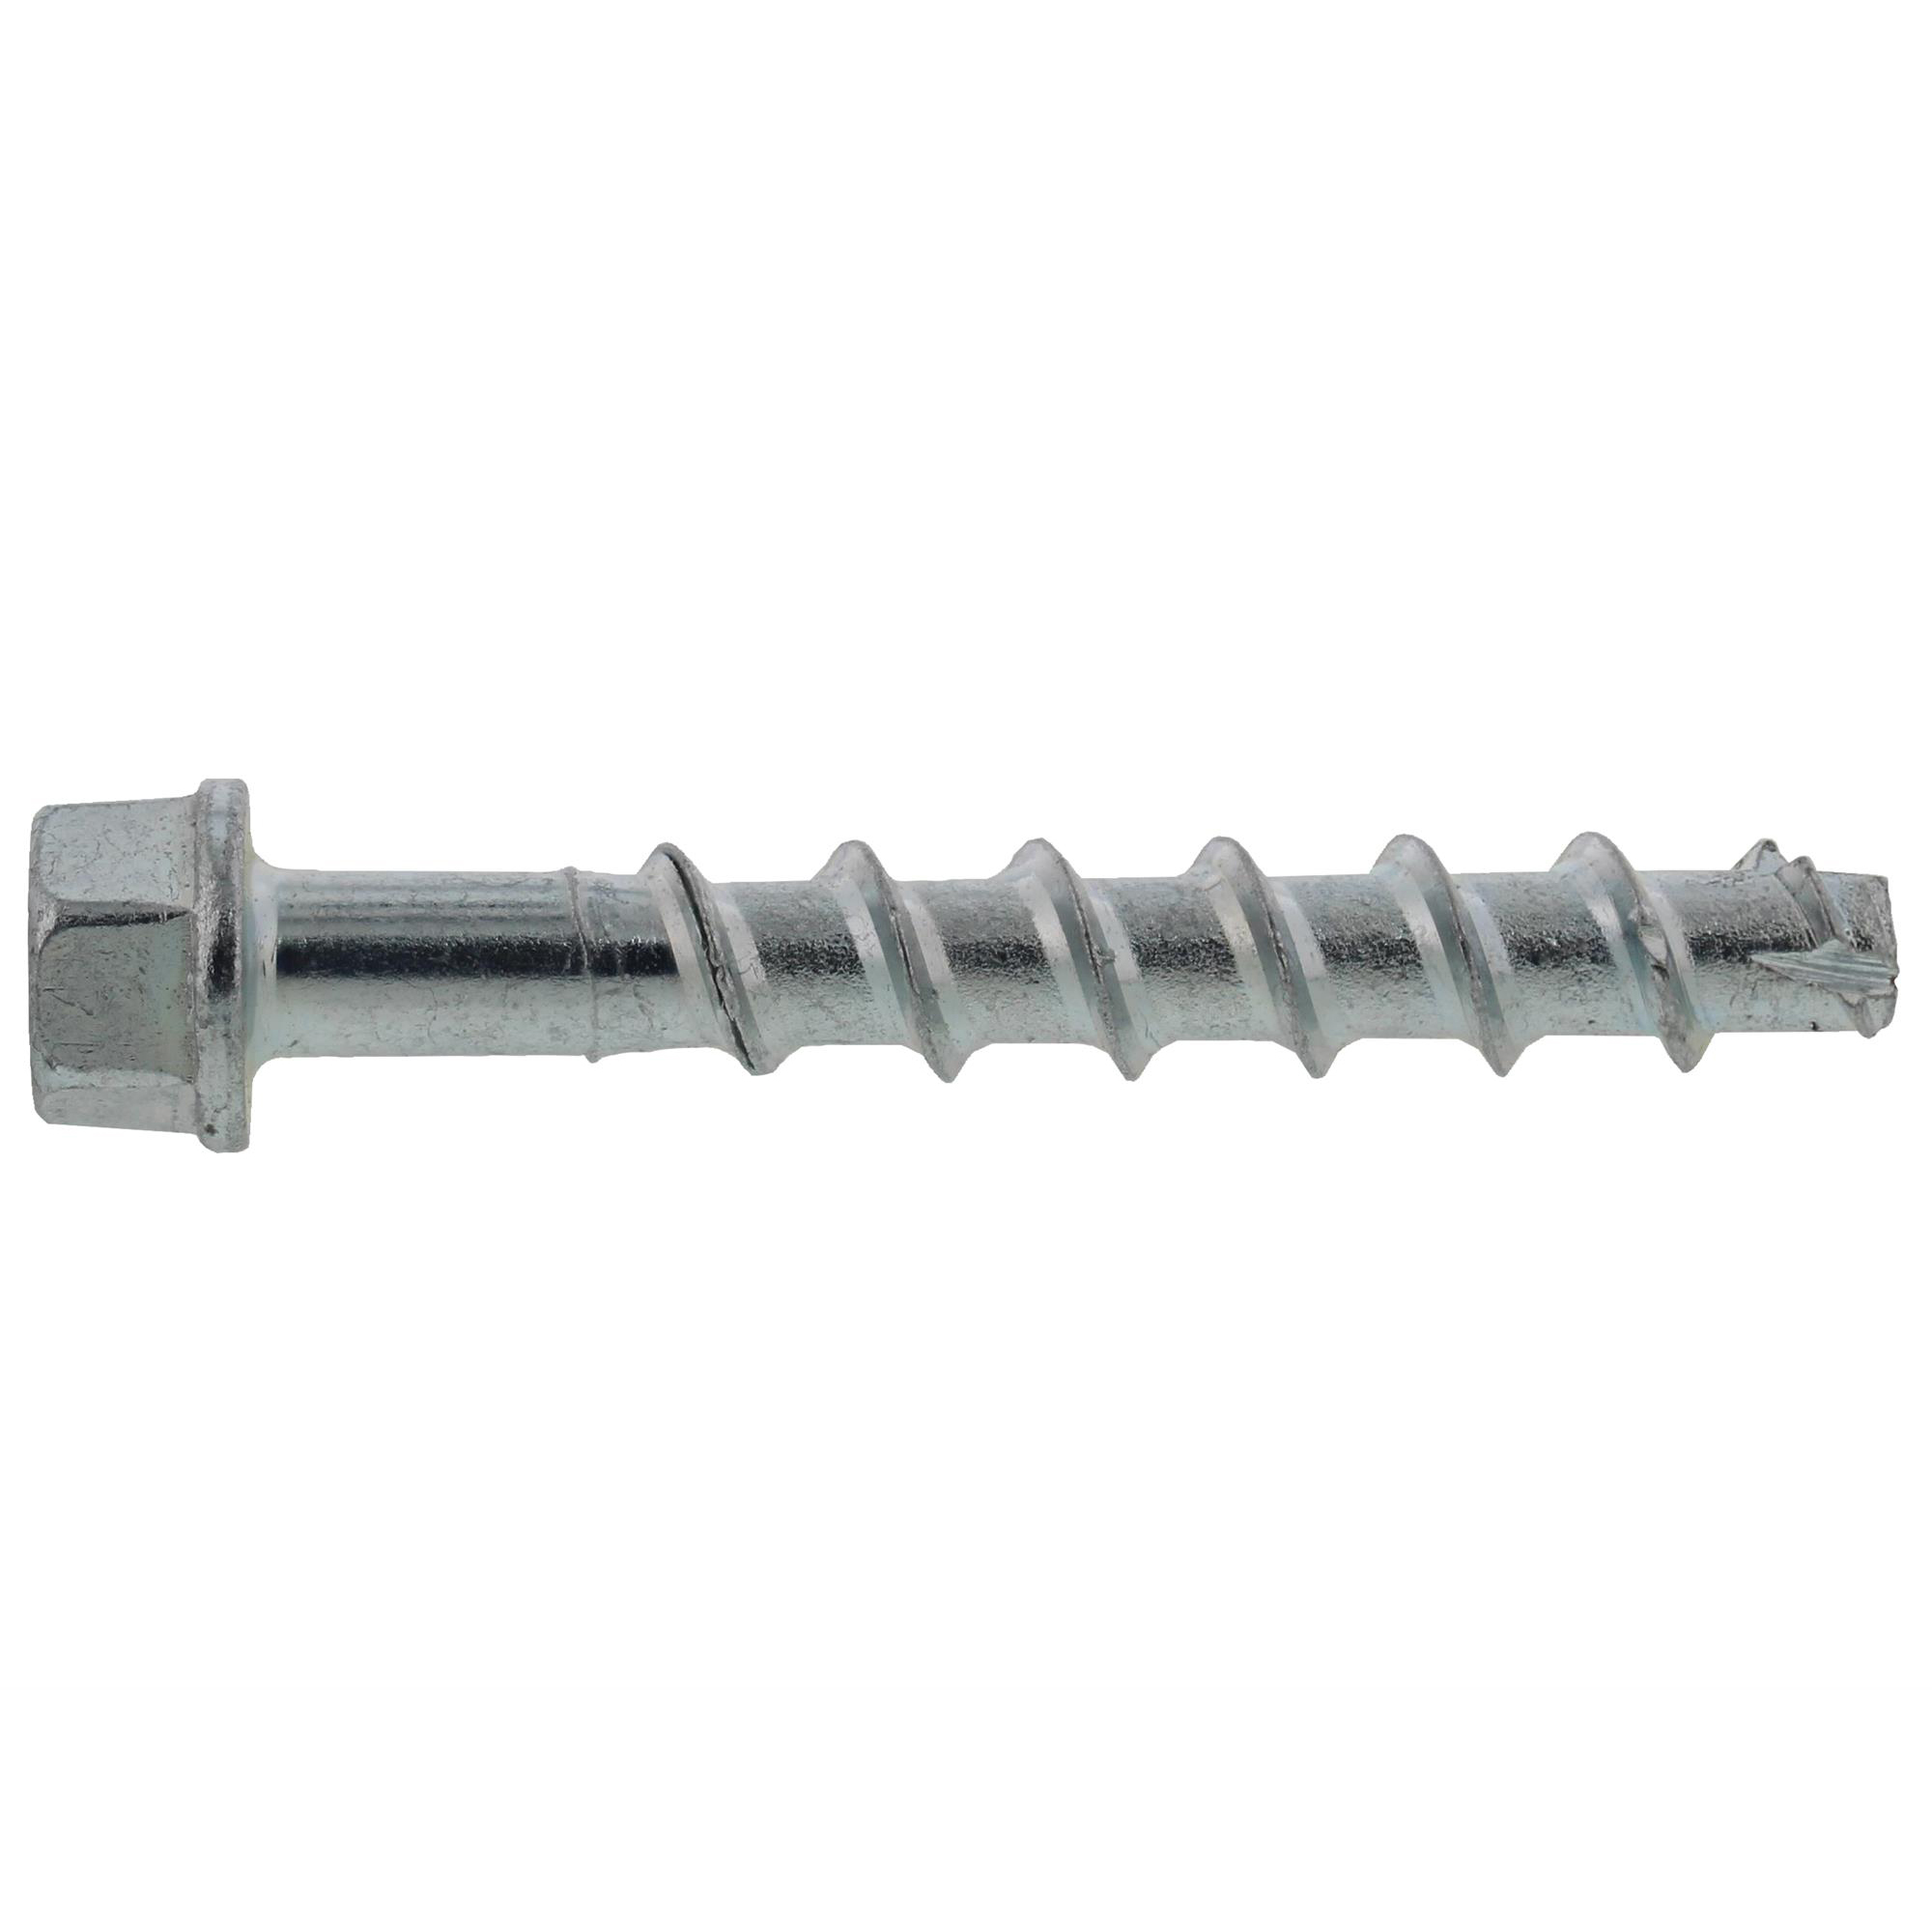 Spit Tapcon LDT M10×64mm box of 50 self tapping  concrete fixings Free postage. 